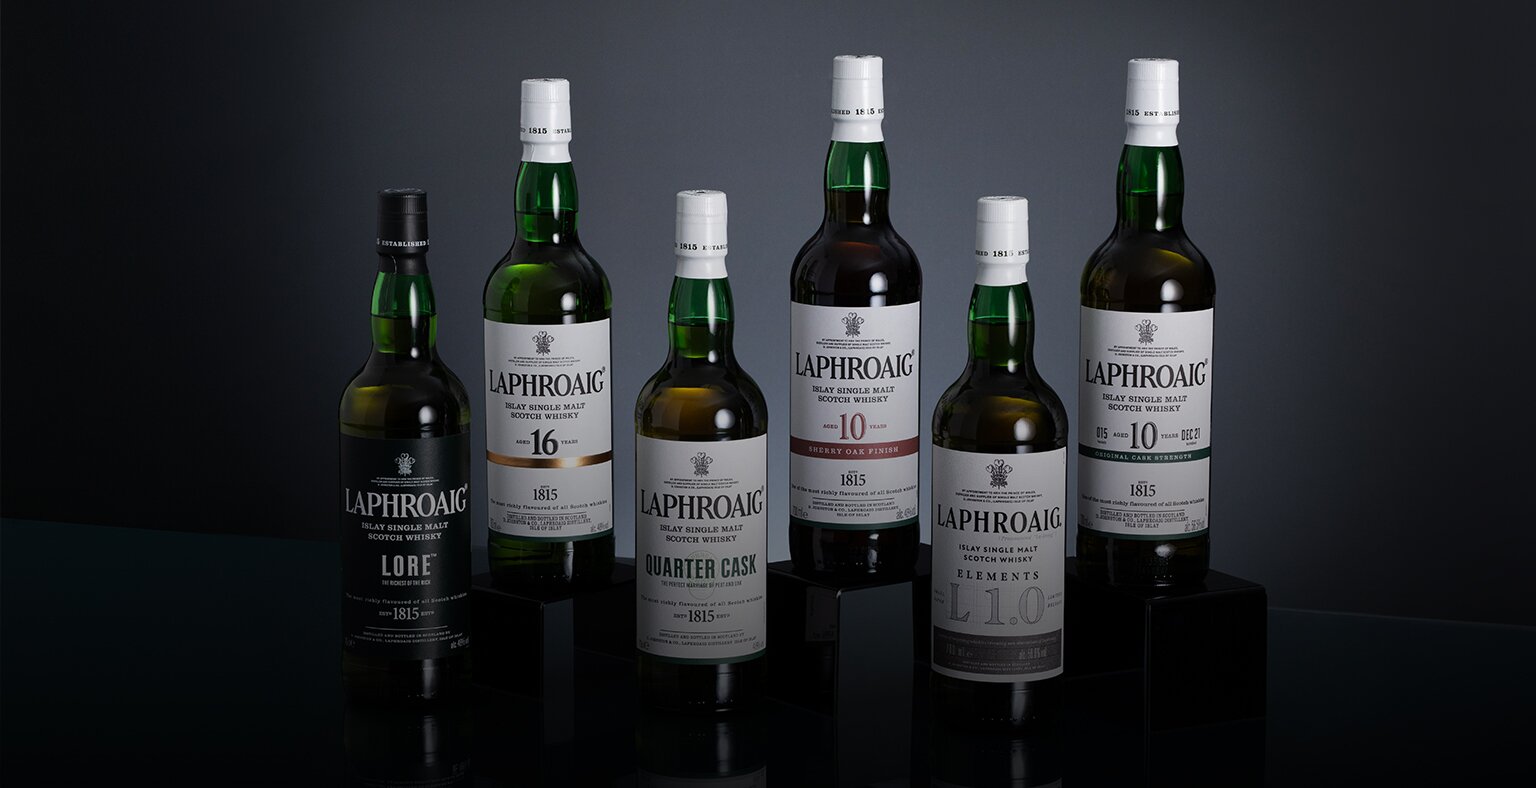 A selection of six bottles from the Laphroaig Whisky range.